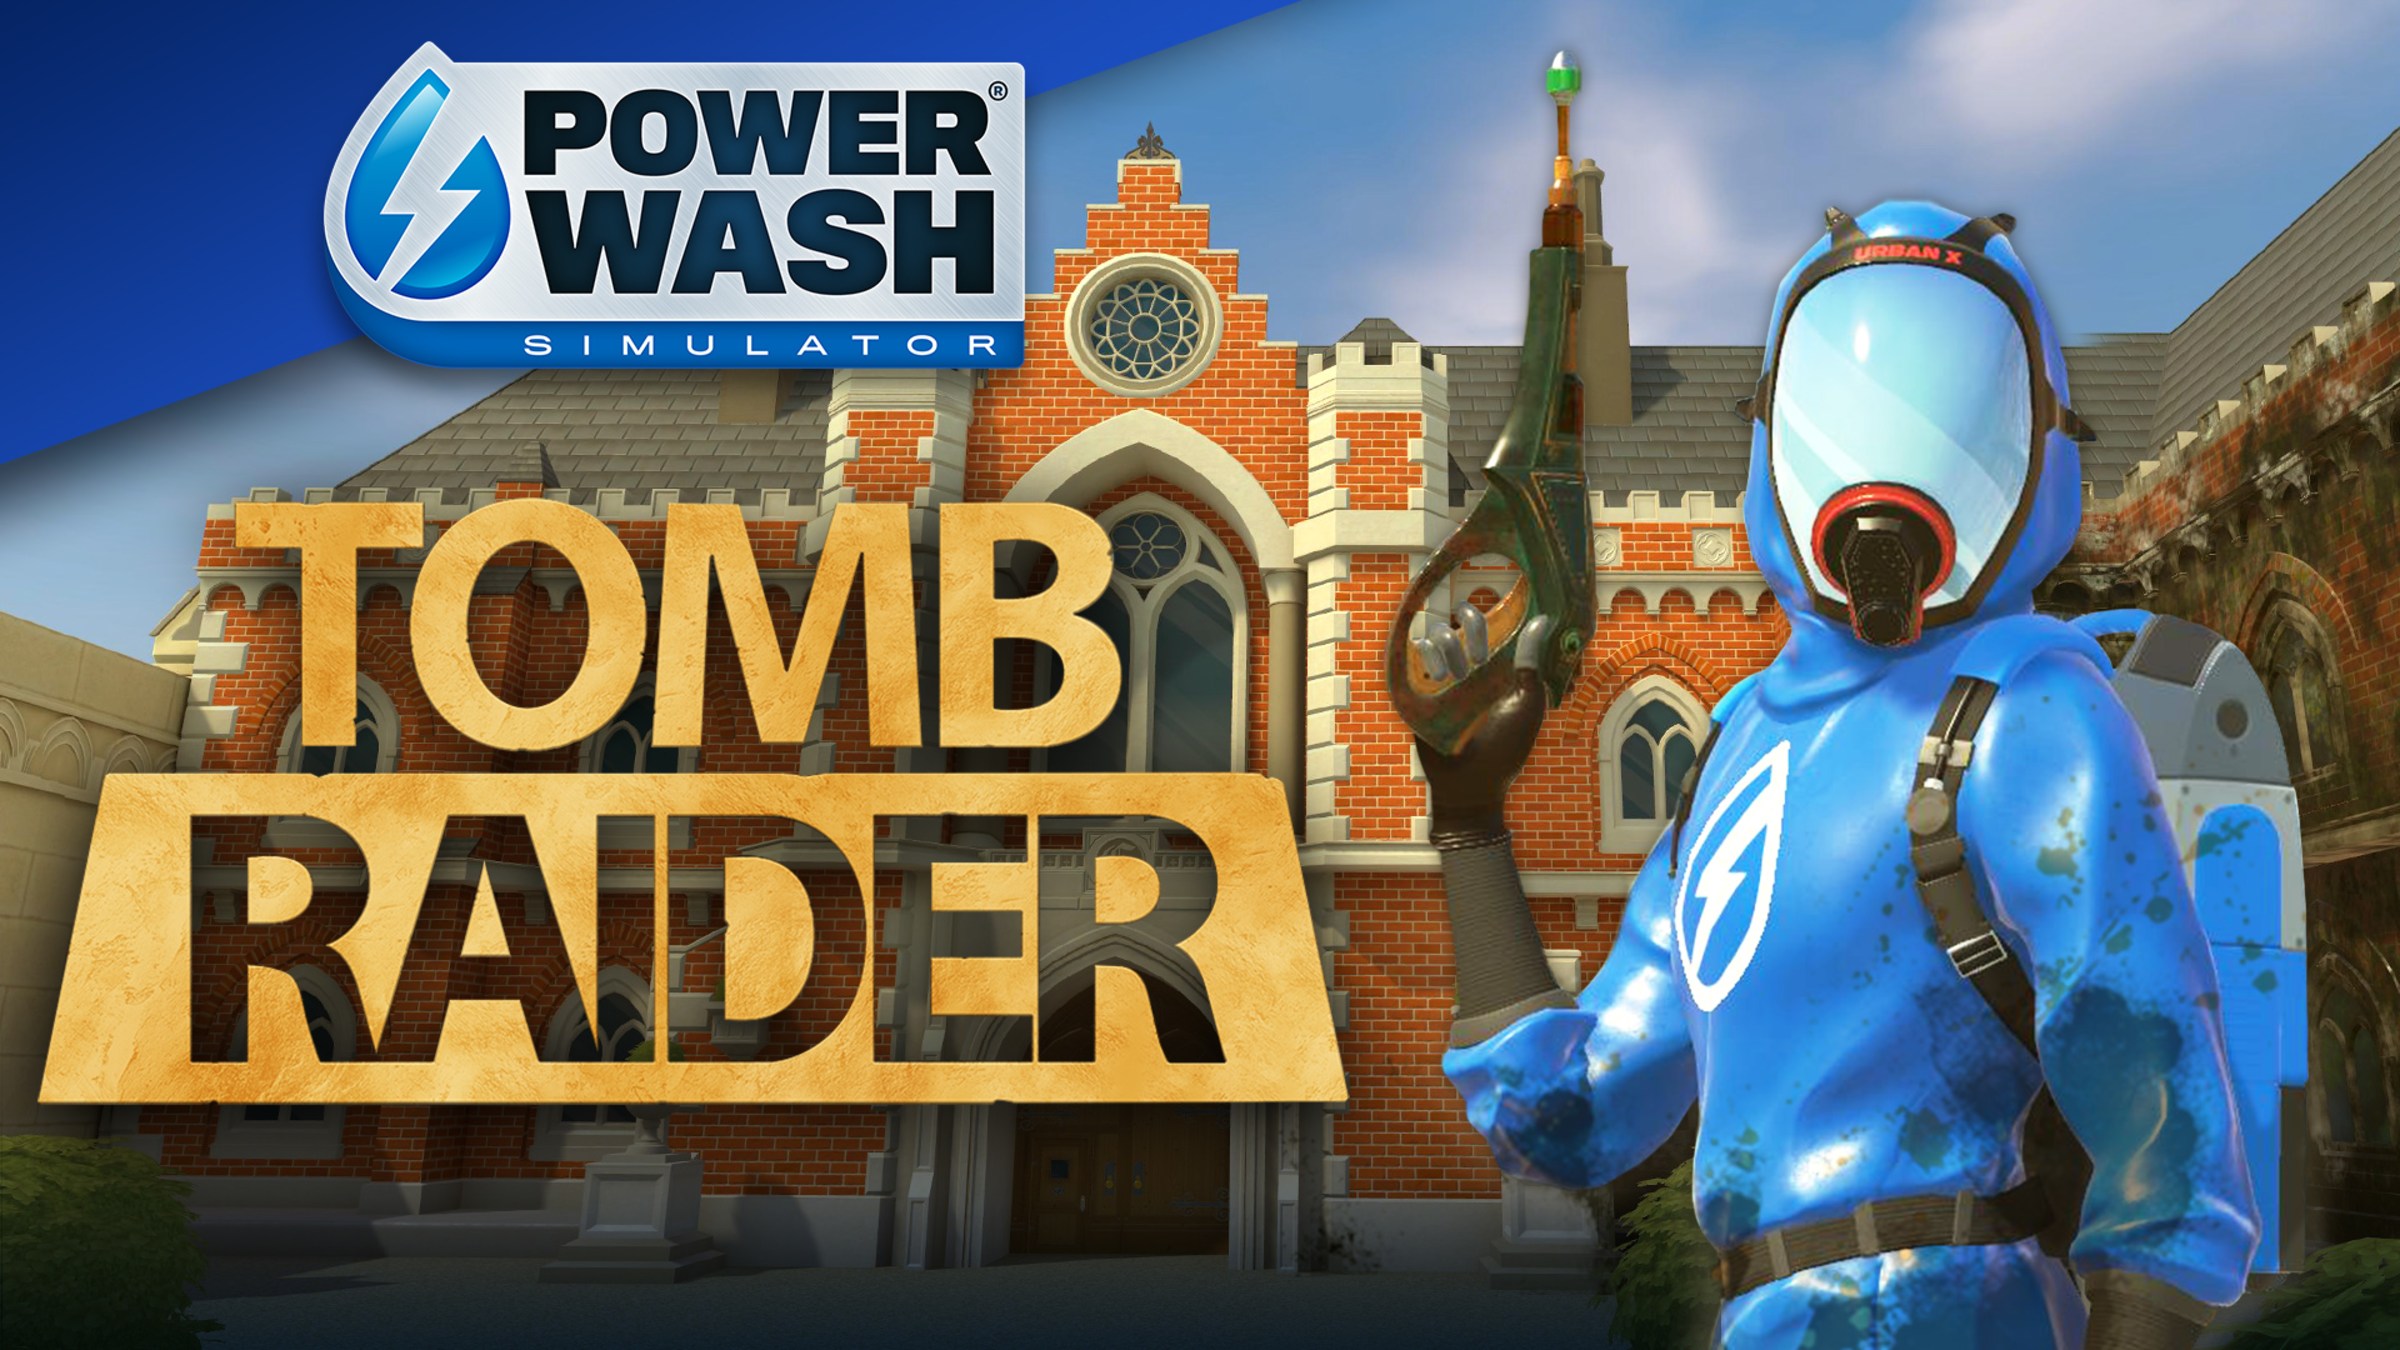 Powerwash Simulator Tomb Raider Expansion Pack For Nintendo Switch Nintendo Official Site